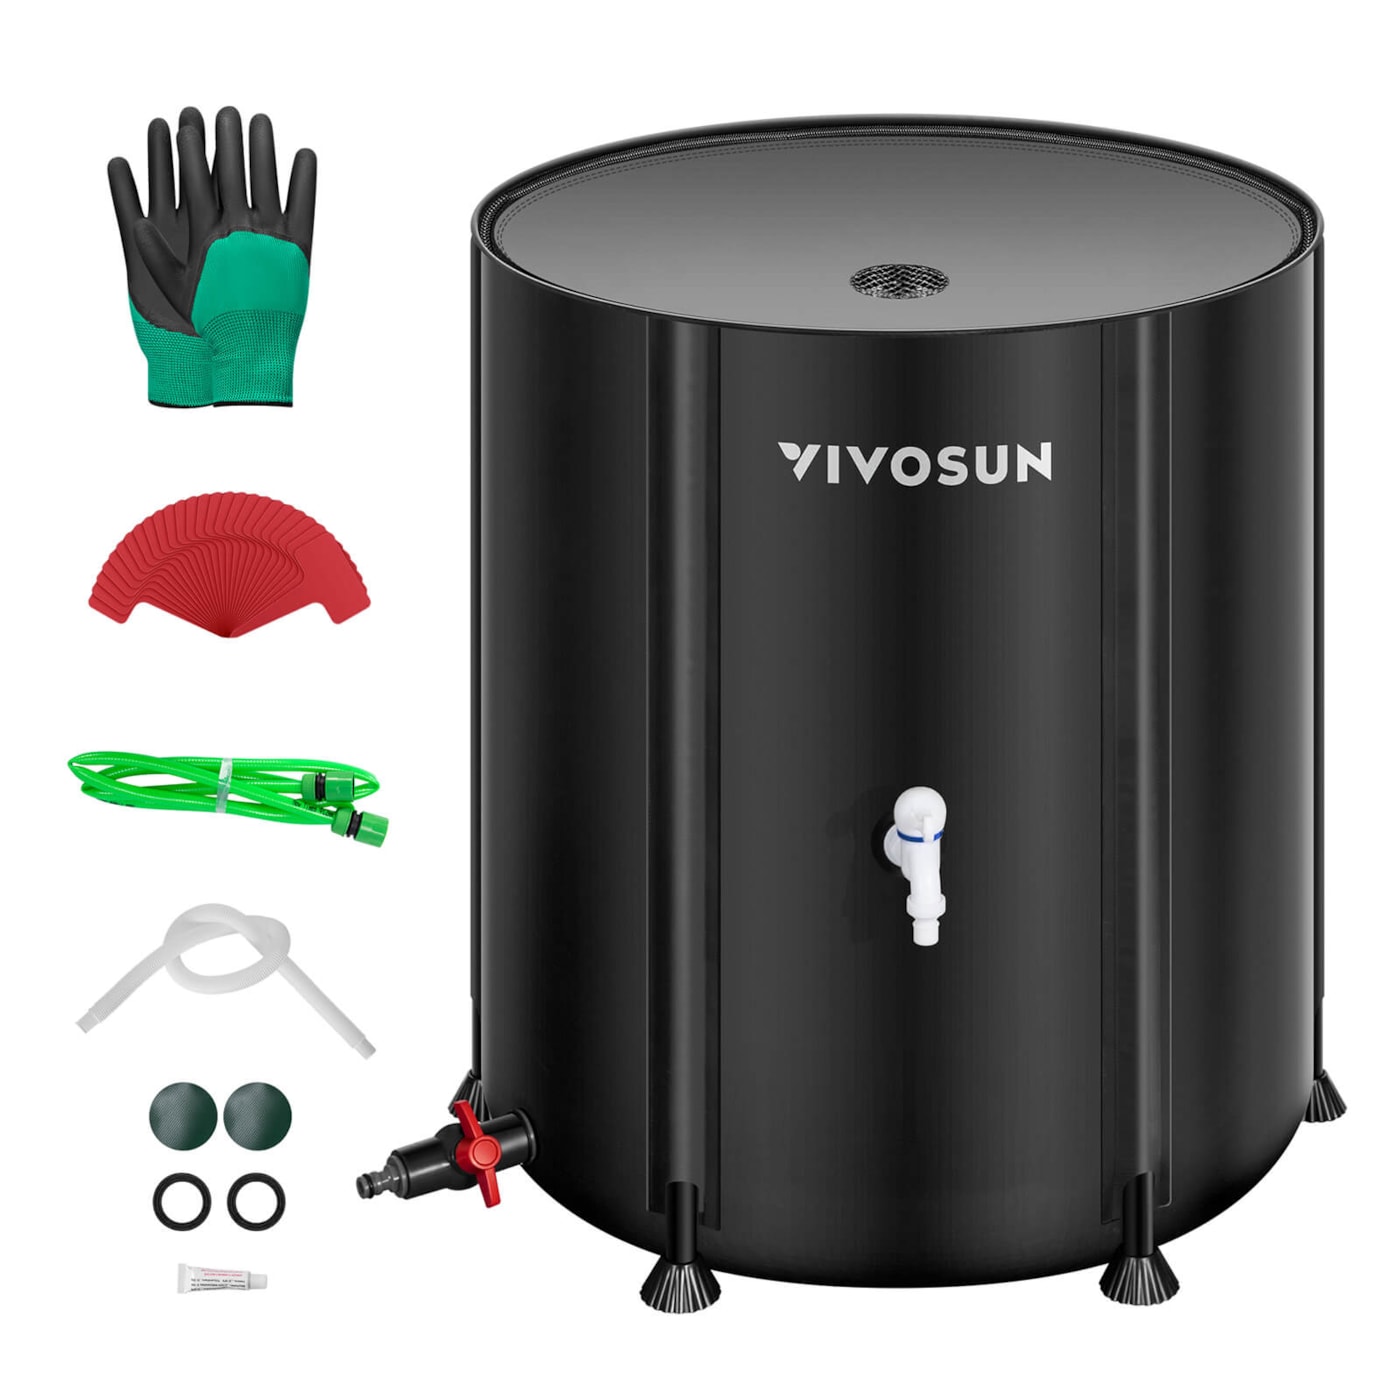 VIVOSUN Collapsible Rain Barrel, 132 Gallon Water Storage Tank with 1000D Oxford Cloth, Portable Rain Collection System Includes Two Spigots and Overflow Kit, Black